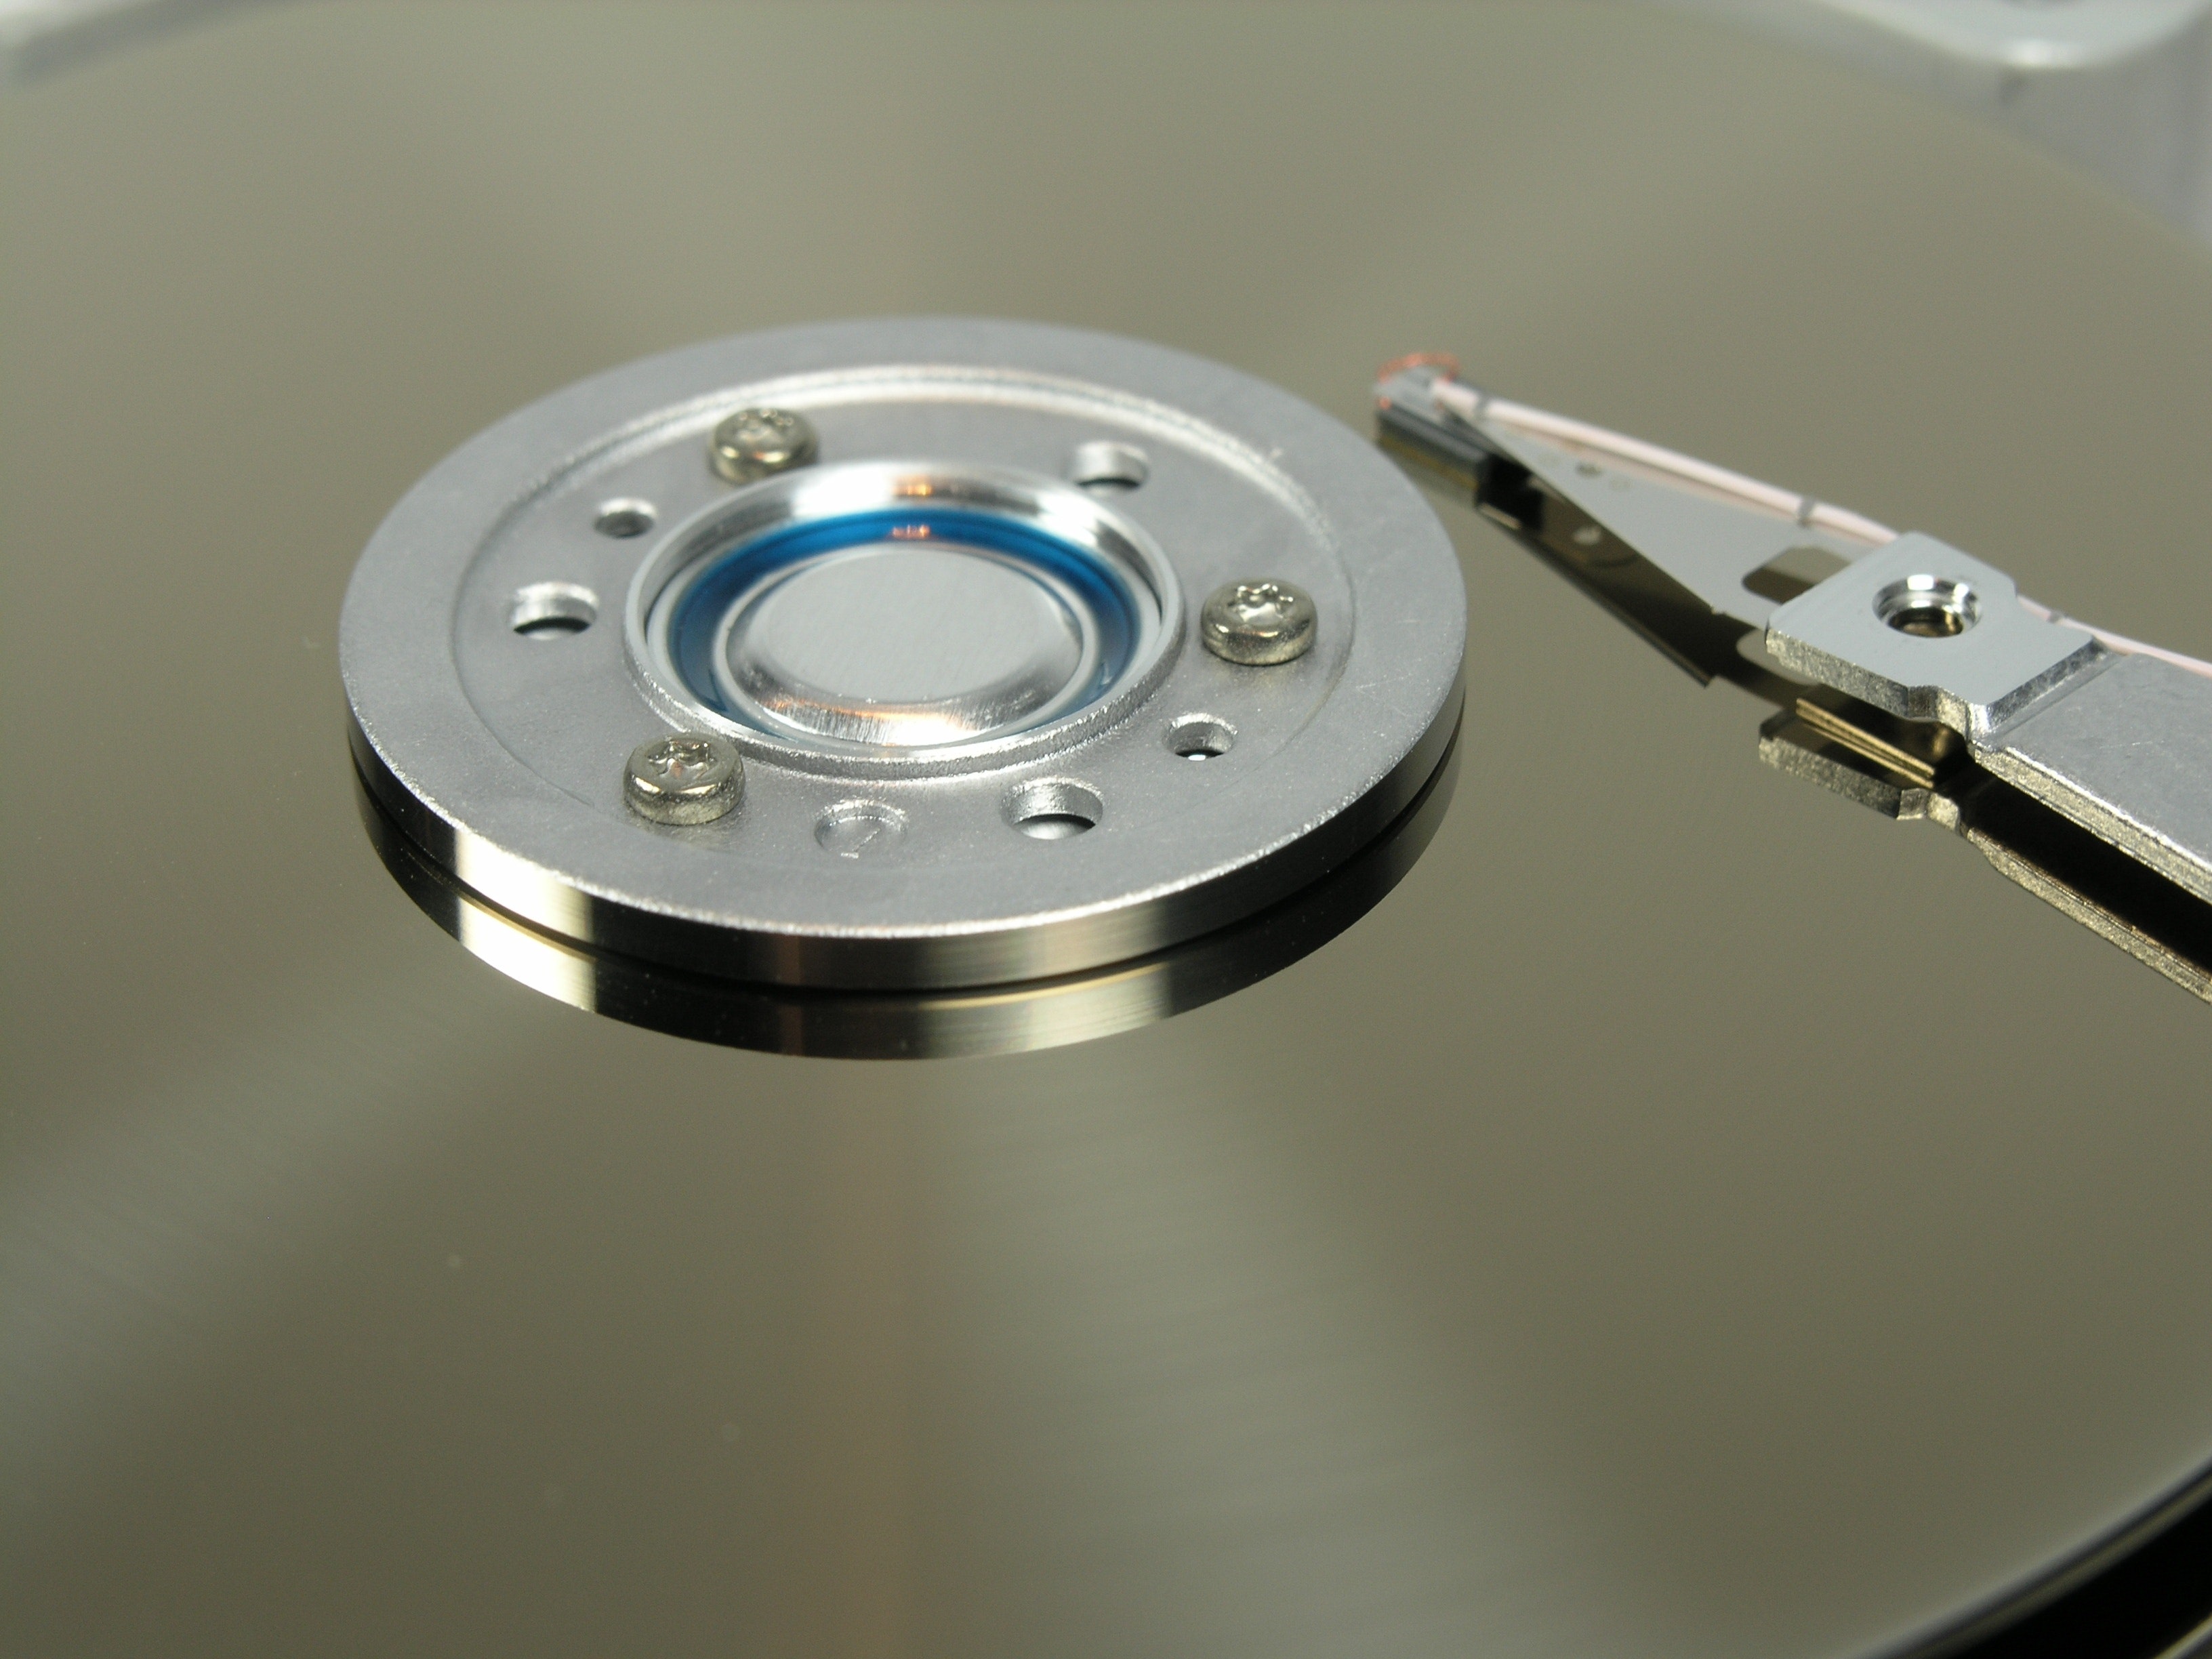 Stainless steel hard disc drive interior photo